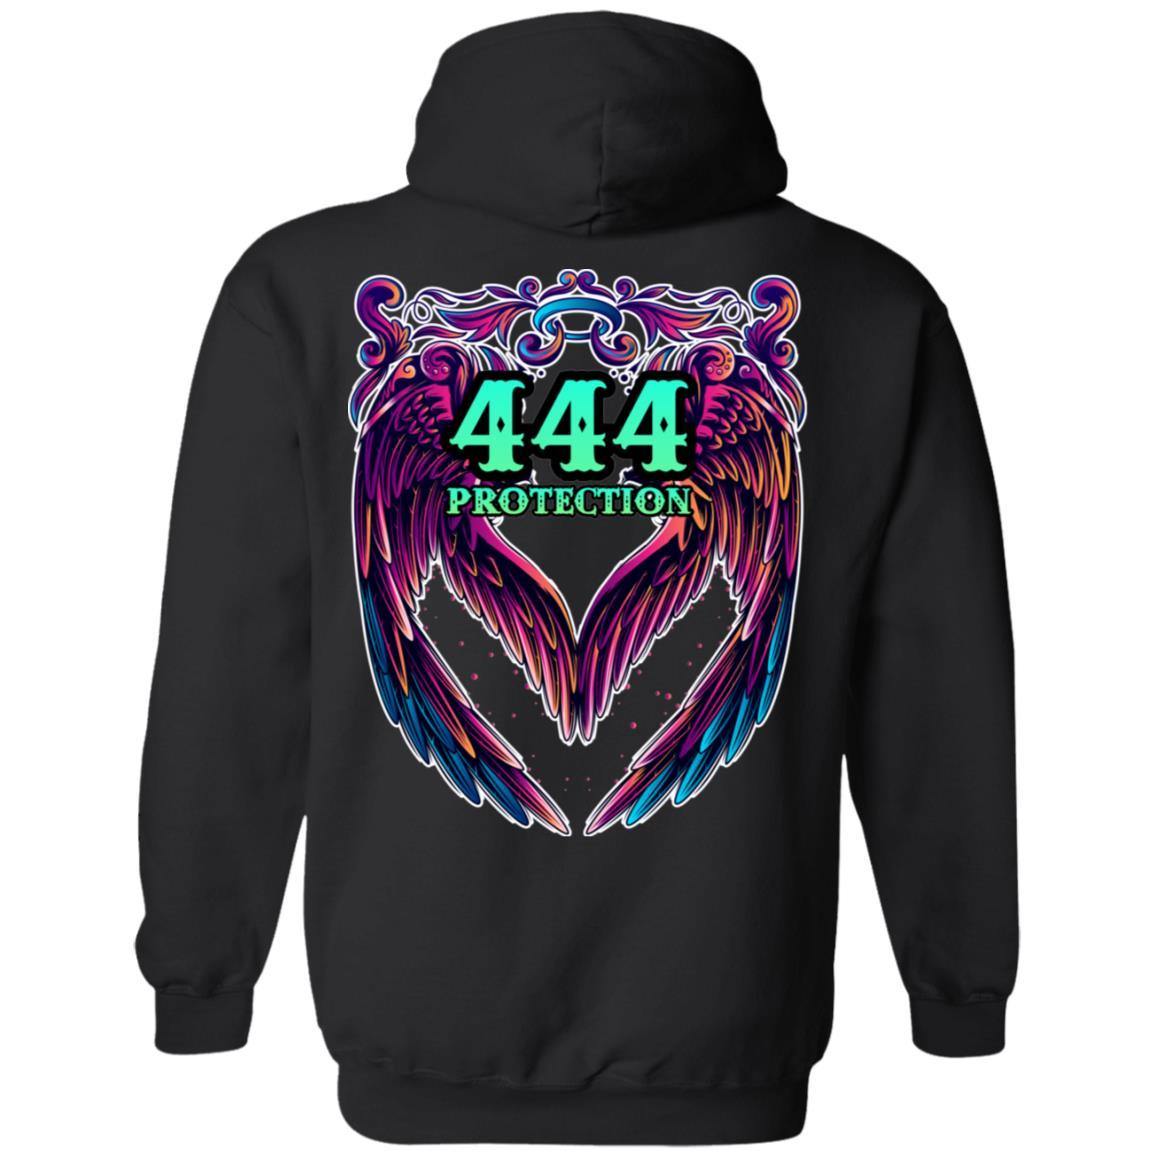 444 ANGEL NUMBER - PROTECTION - DESIGN ON BACK - SCORP ZONE LOGO ON FRONT -Z66 Pullover Hoodie - ScorpZone